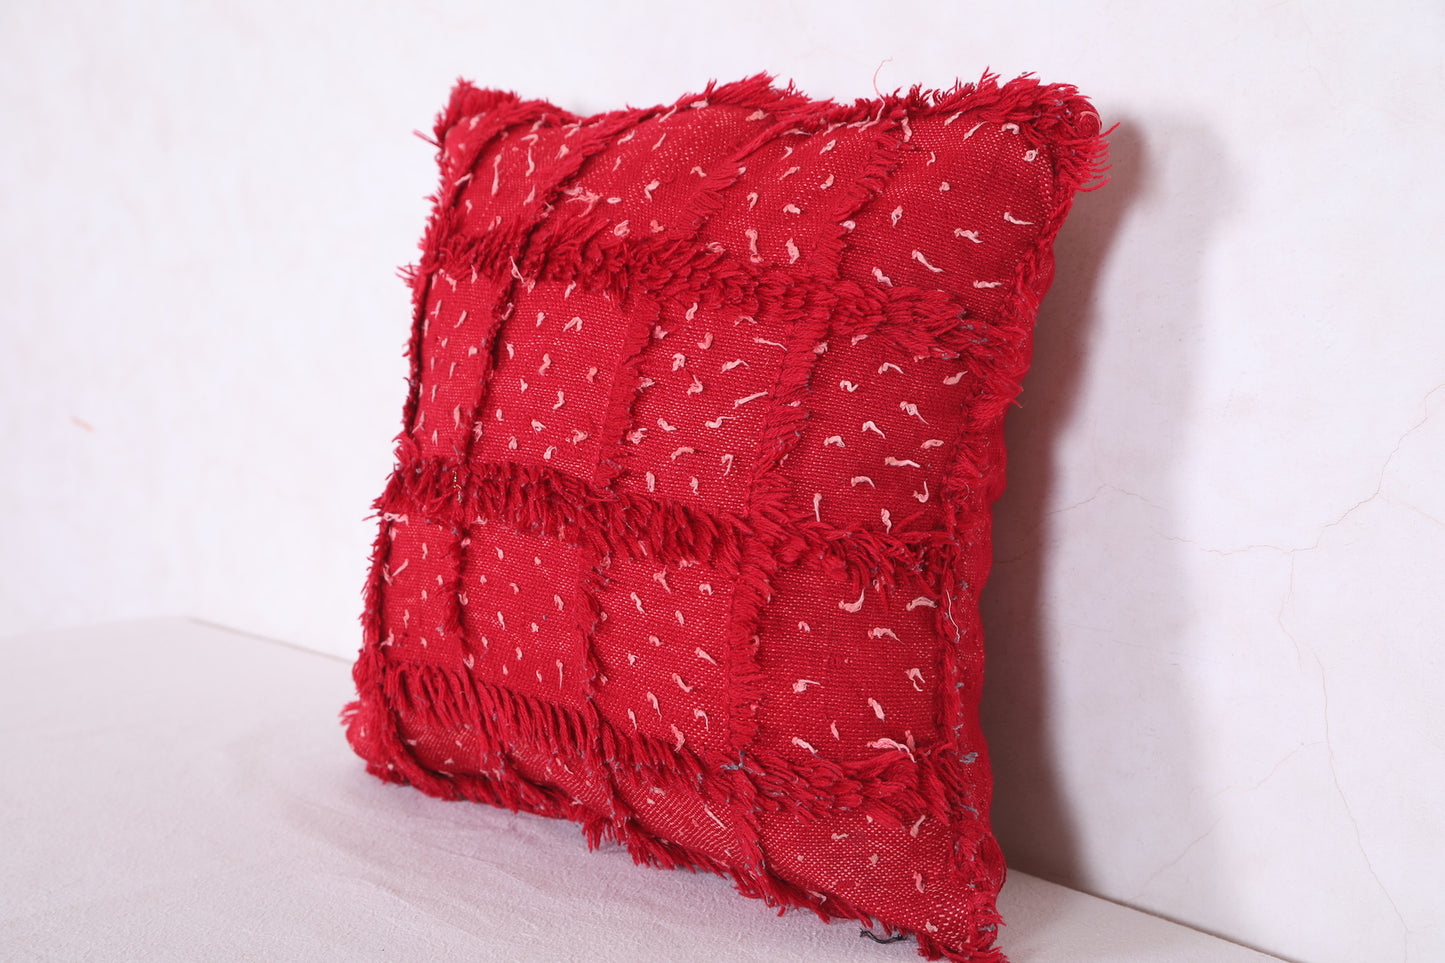 Moroccan Red Pillow 15.7 INCHES X 15.7 INCHES